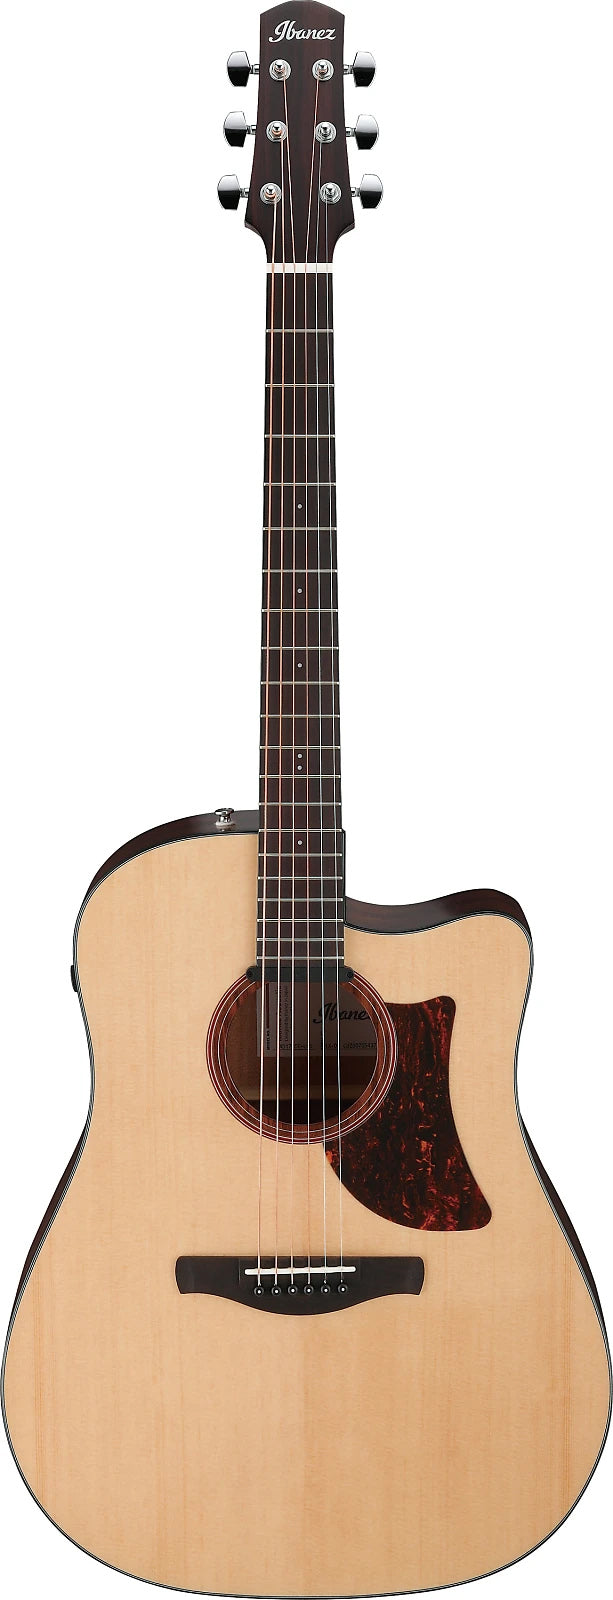 Ibanez AAD170CE-LGS Acoustic Guitar Advanced Acoustic Series Grand Dreadnought Cutaway